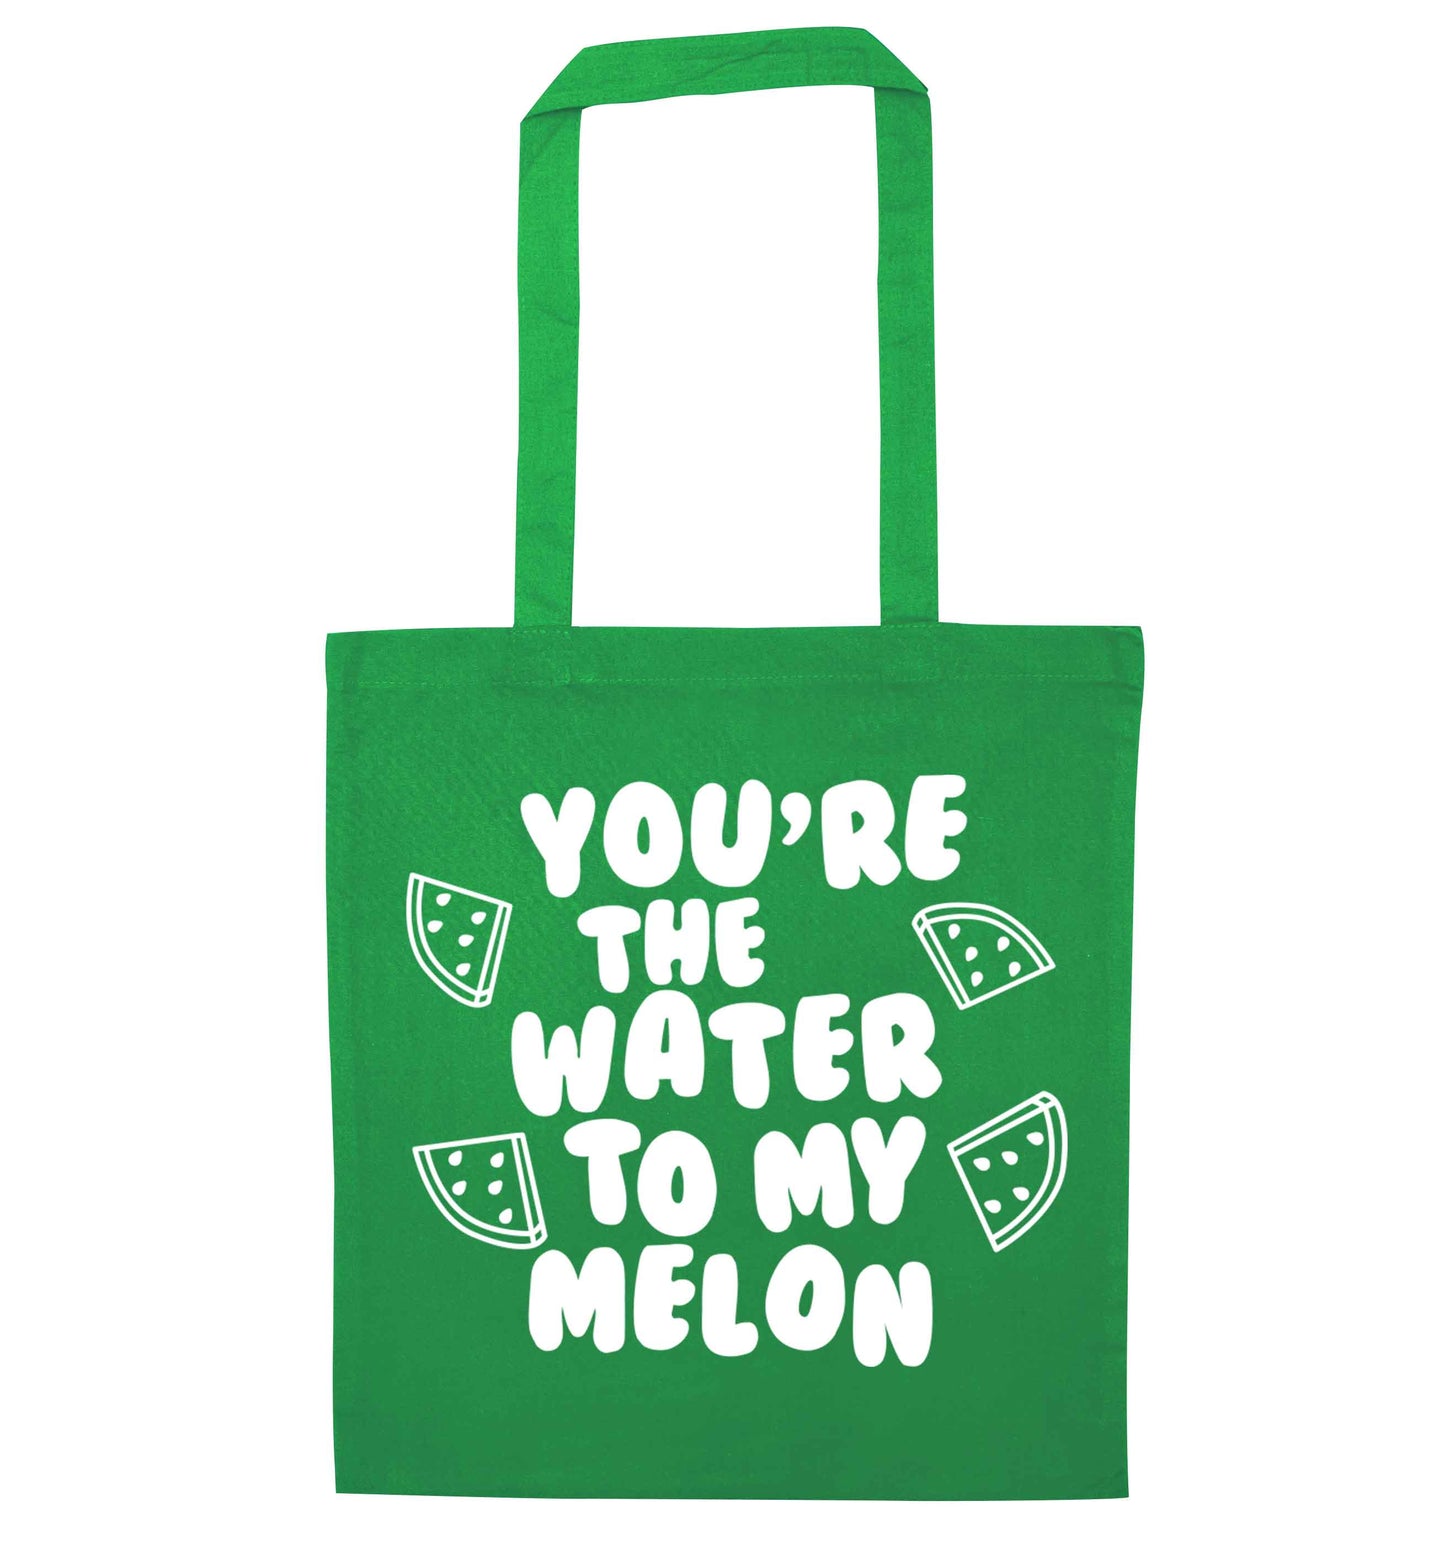 You're the water to my melon green tote bag